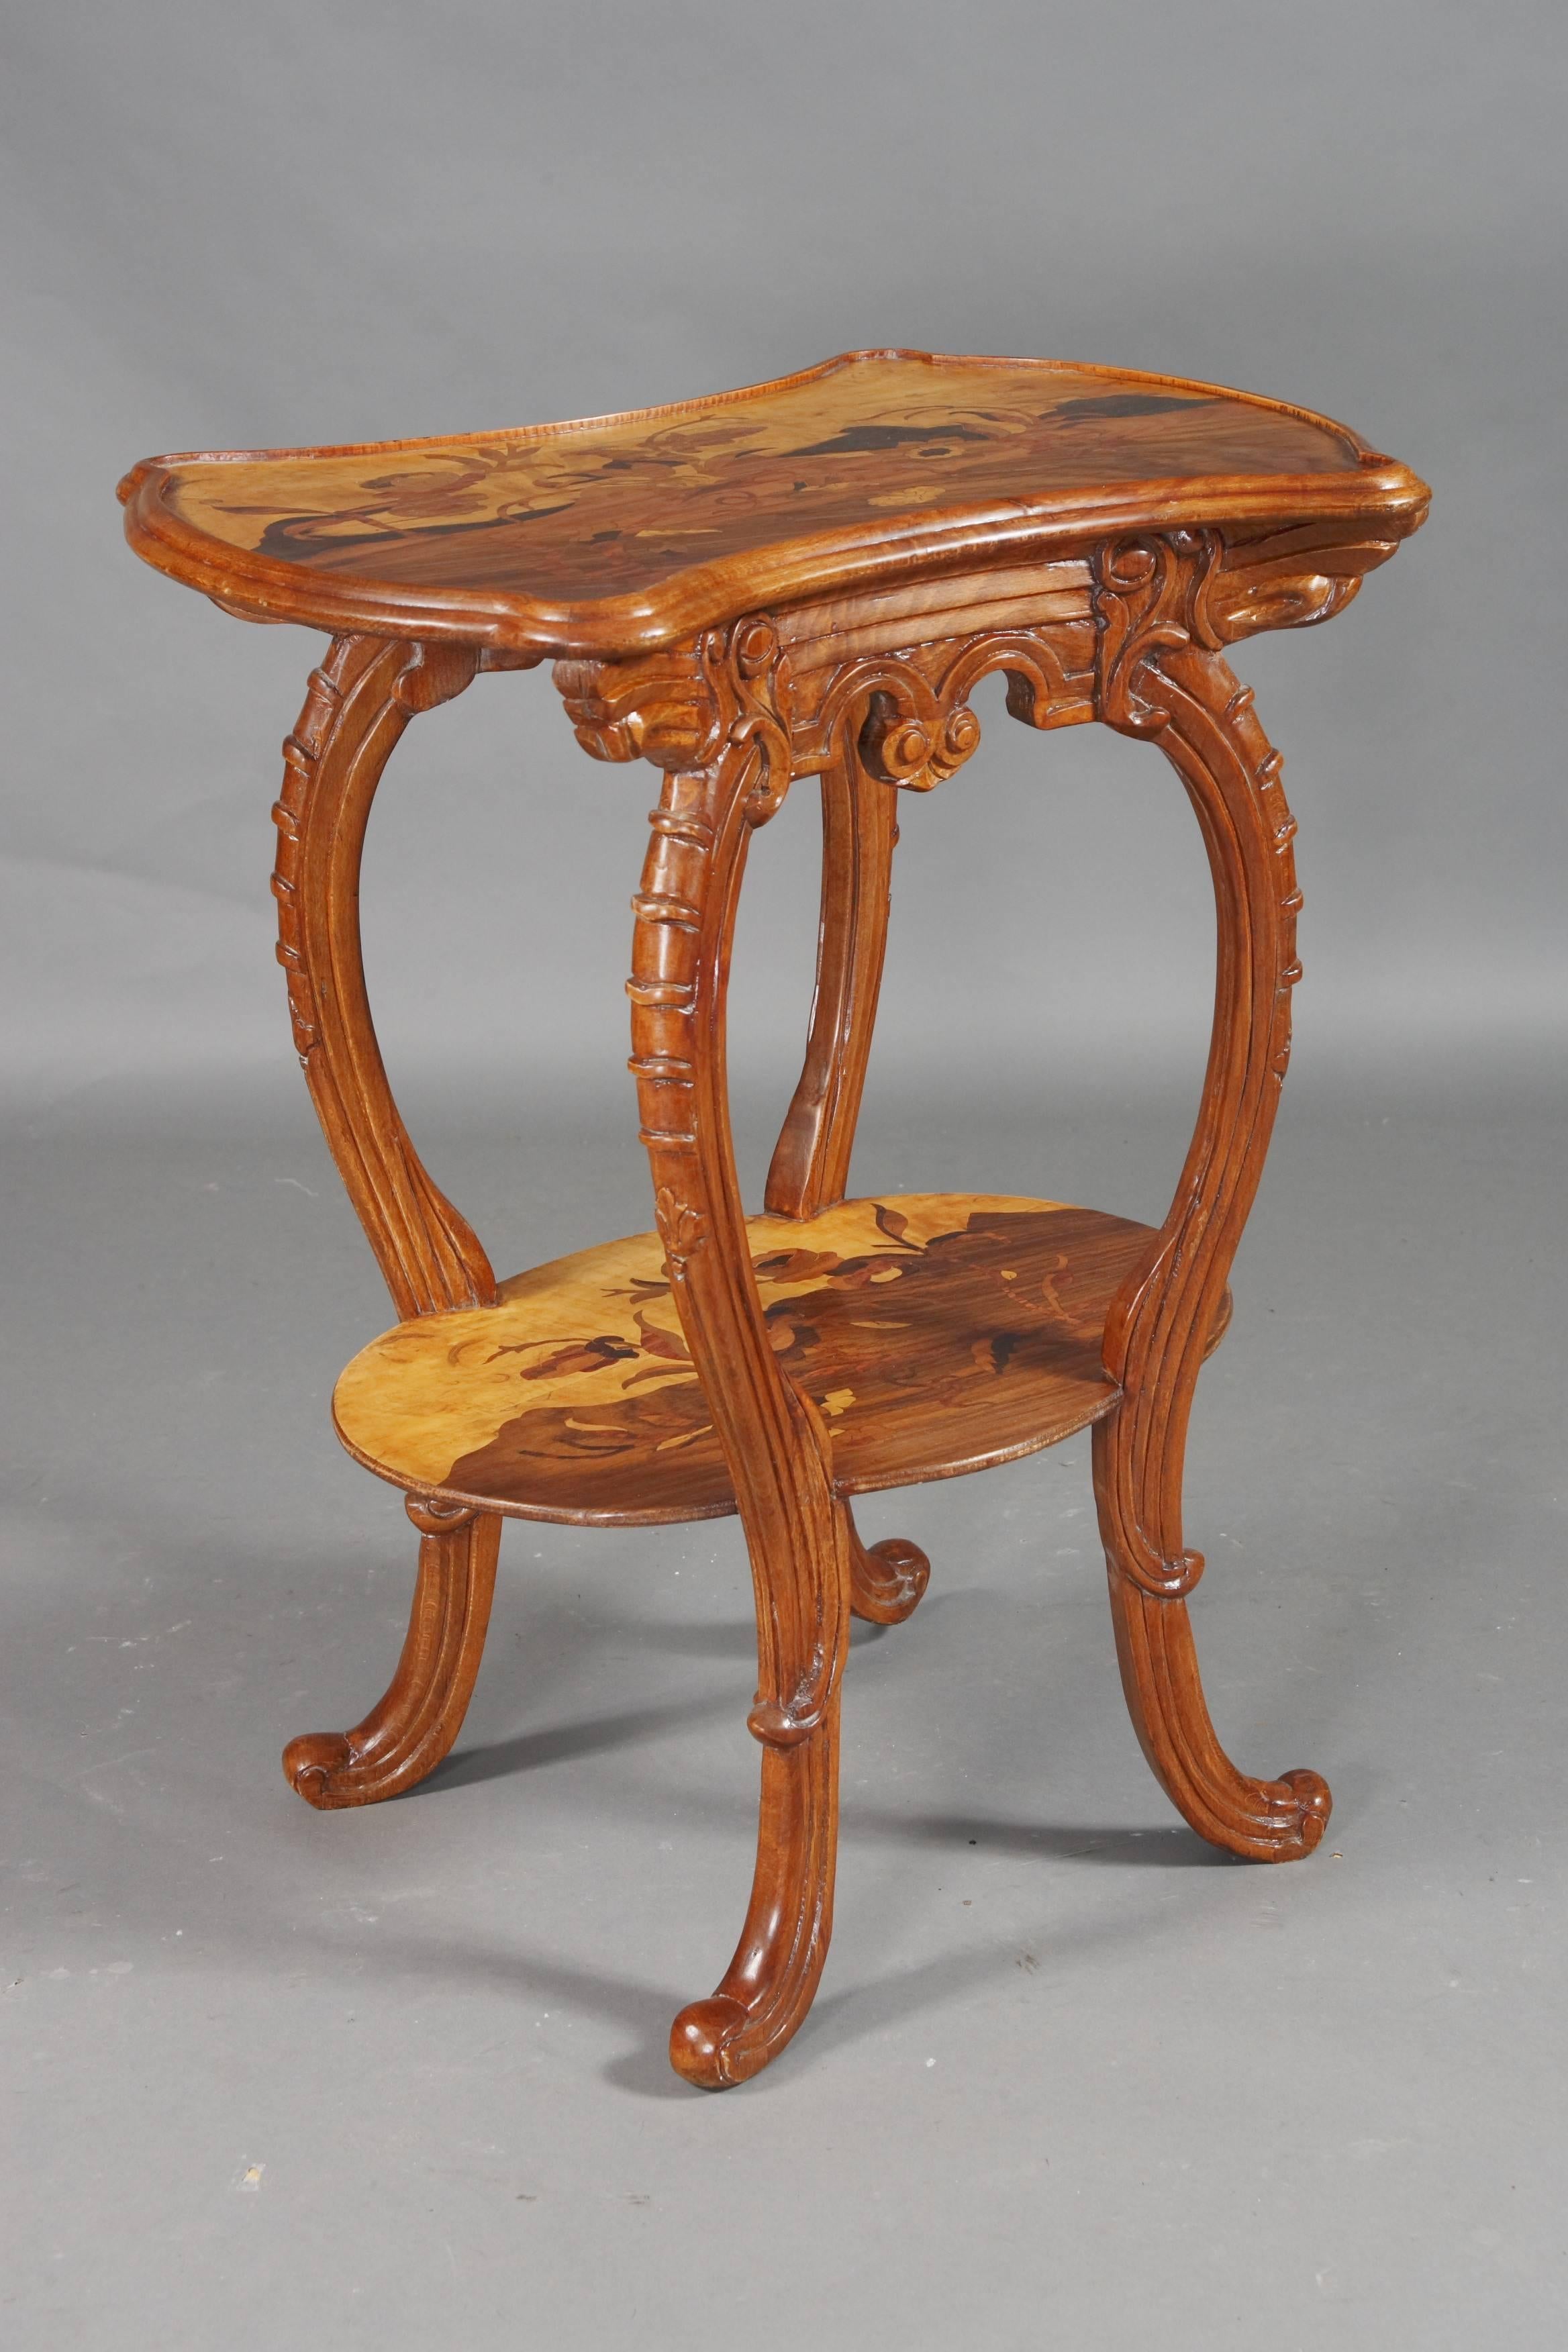 Occasional table in Emile Galle style.
Various colored veneers on solid wood.

(G-Gm-50).